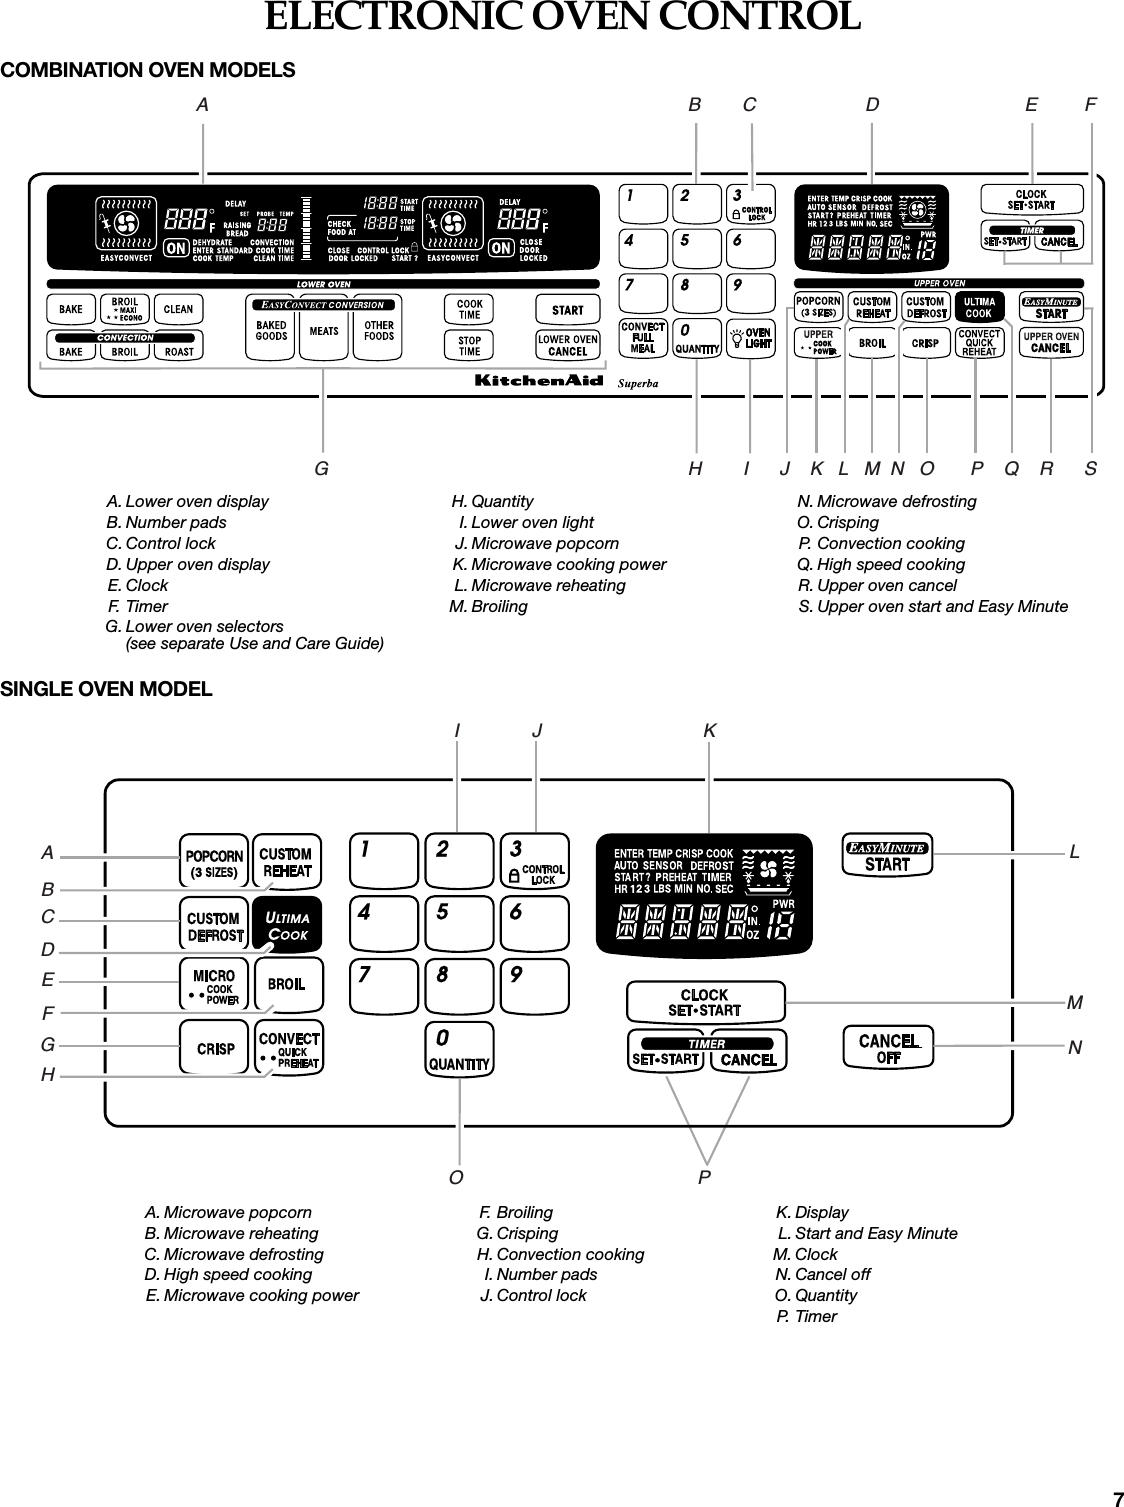 7ELECTRONIC OVEN CONTROLCOMBINATION OVEN MODELSSINGLE OVEN MODELA. Lower oven displayB. Number padsC. Control lockD. Upper oven displayE. ClockF. Tim erG. Lower oven selectors(see separate Use and Care Guide)H. QuantityI. Lower oven lightJ. Microwave popcornK. Microwave cooking powerL. Microwave reheatingM. BroilingN. Microwave defrostingO. CrispingP. Convection cookingQ. High speed cookingR. Upper oven cancelS. Upper oven start and Easy MinuteA                                                                                            B        C                     D                            E         FG                                                                     H        I      J    K   L   M  N   O       P    Q    R      SA. Microwave popcornB. Microwave reheatingC. Microwave defrostingD. High speed cookingE. Microwave cooking powerF. B r o il i n gG. CrispingH. Convection cookingI. Number padsJ. Control lockK. DisplayL. Start and Easy MinuteM. ClockN. Cancel offO. QuantityP. Tim e r    ABCDEFGHI              J                               KLMNO                                             P